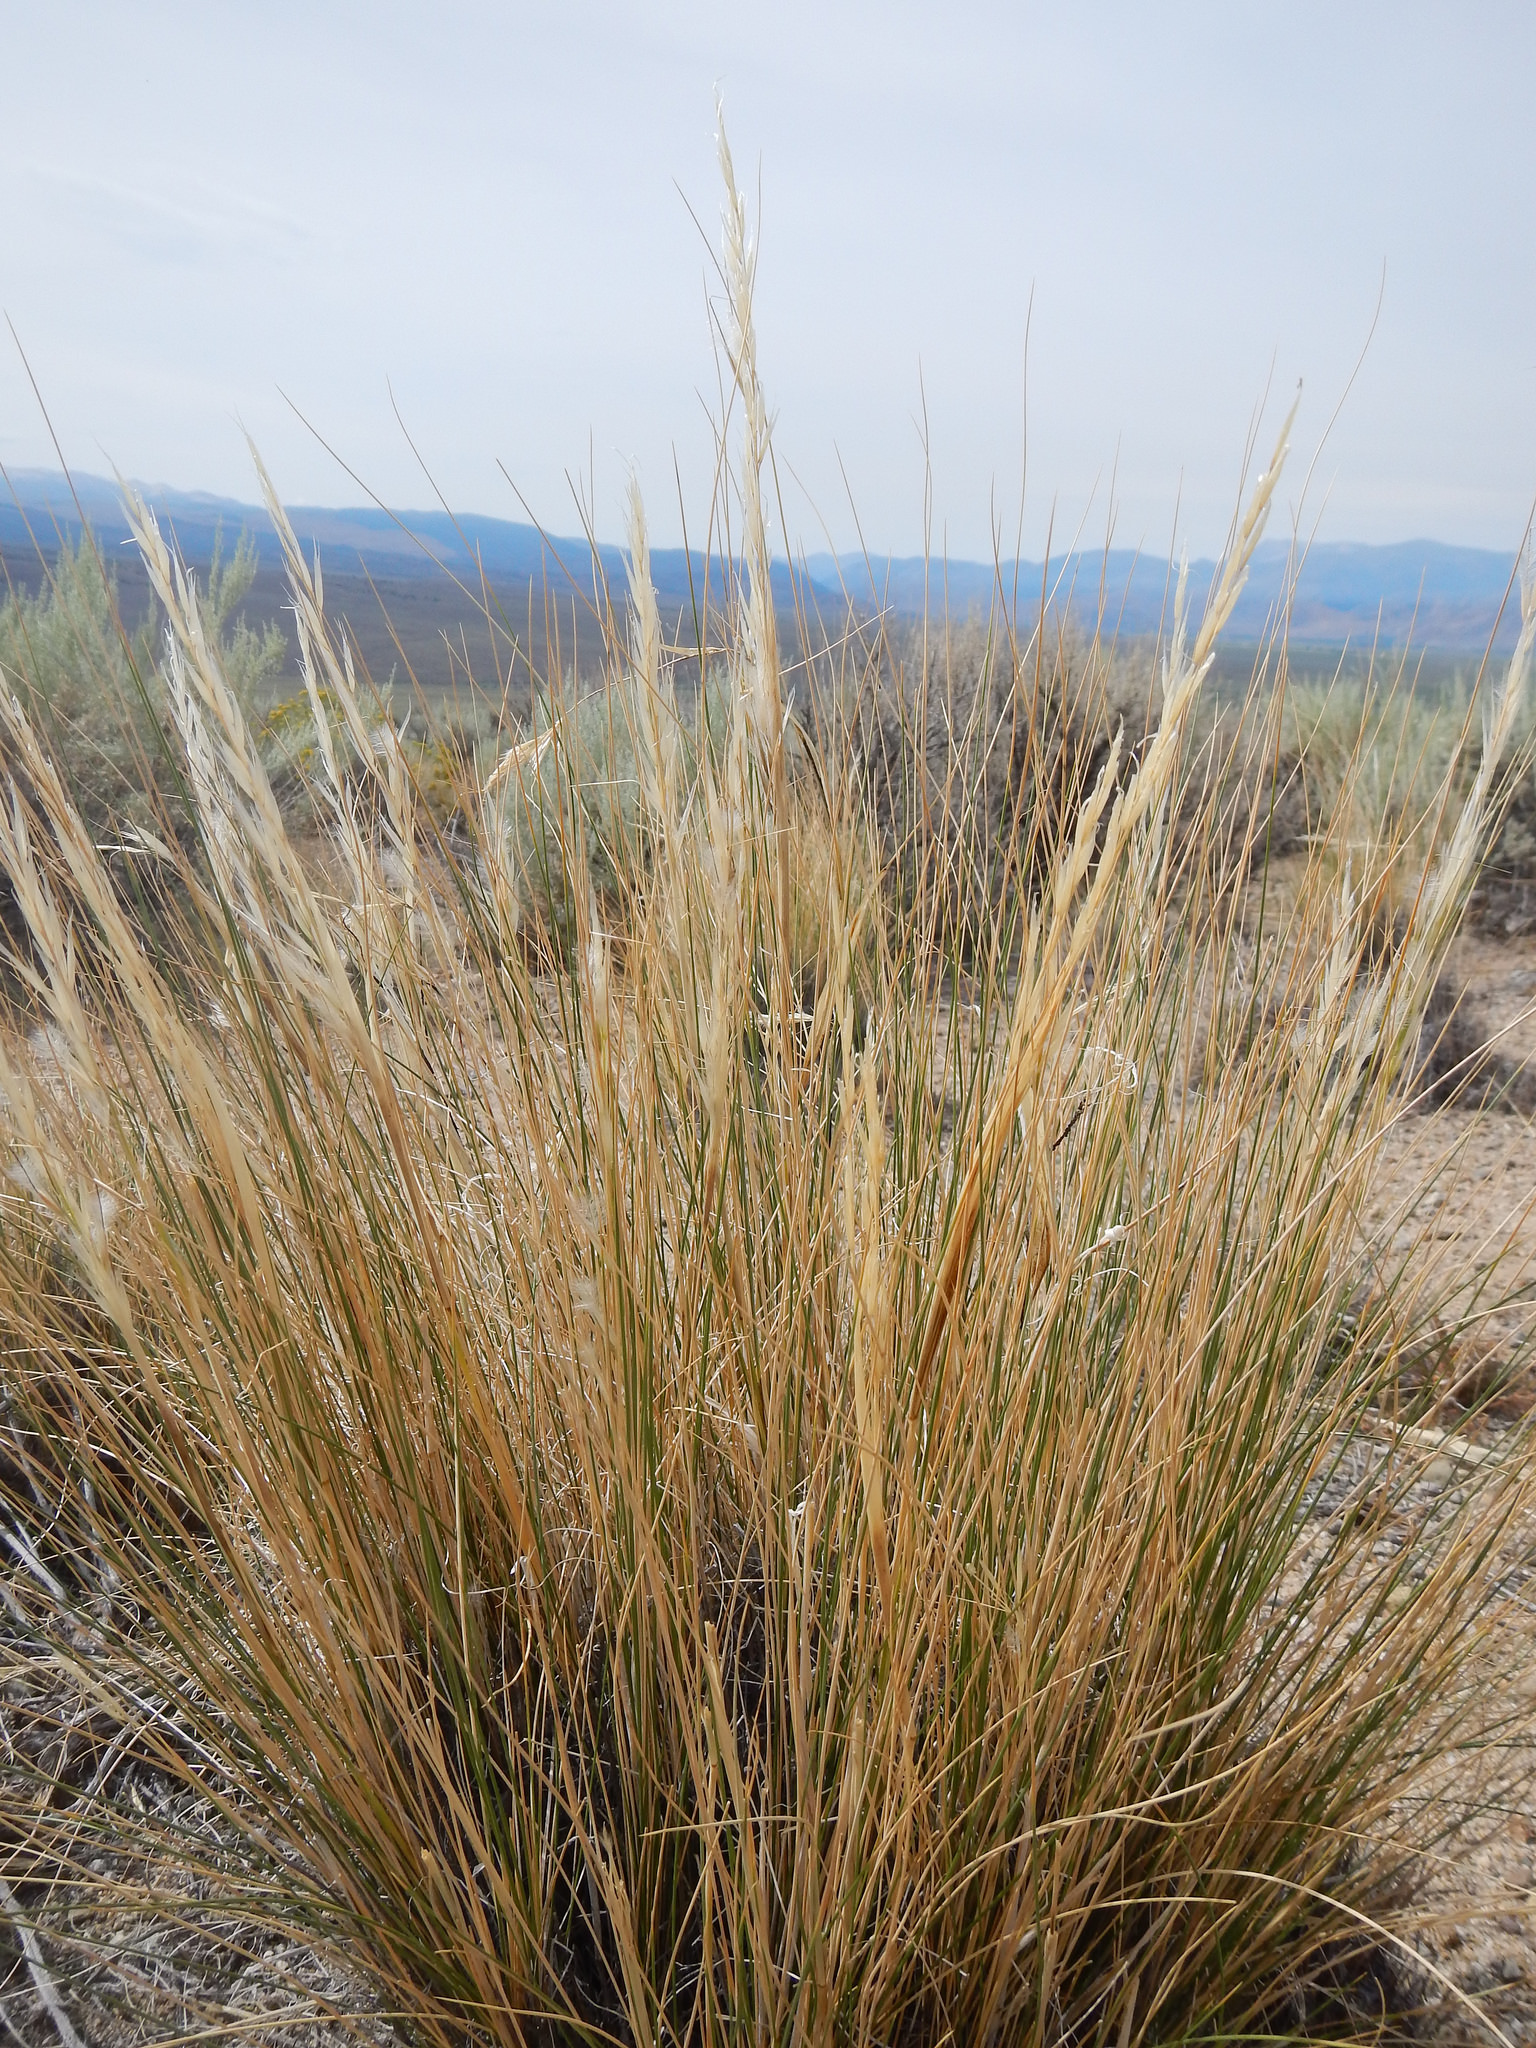 Large clump of desert needlegrass showing upright and spreading stems